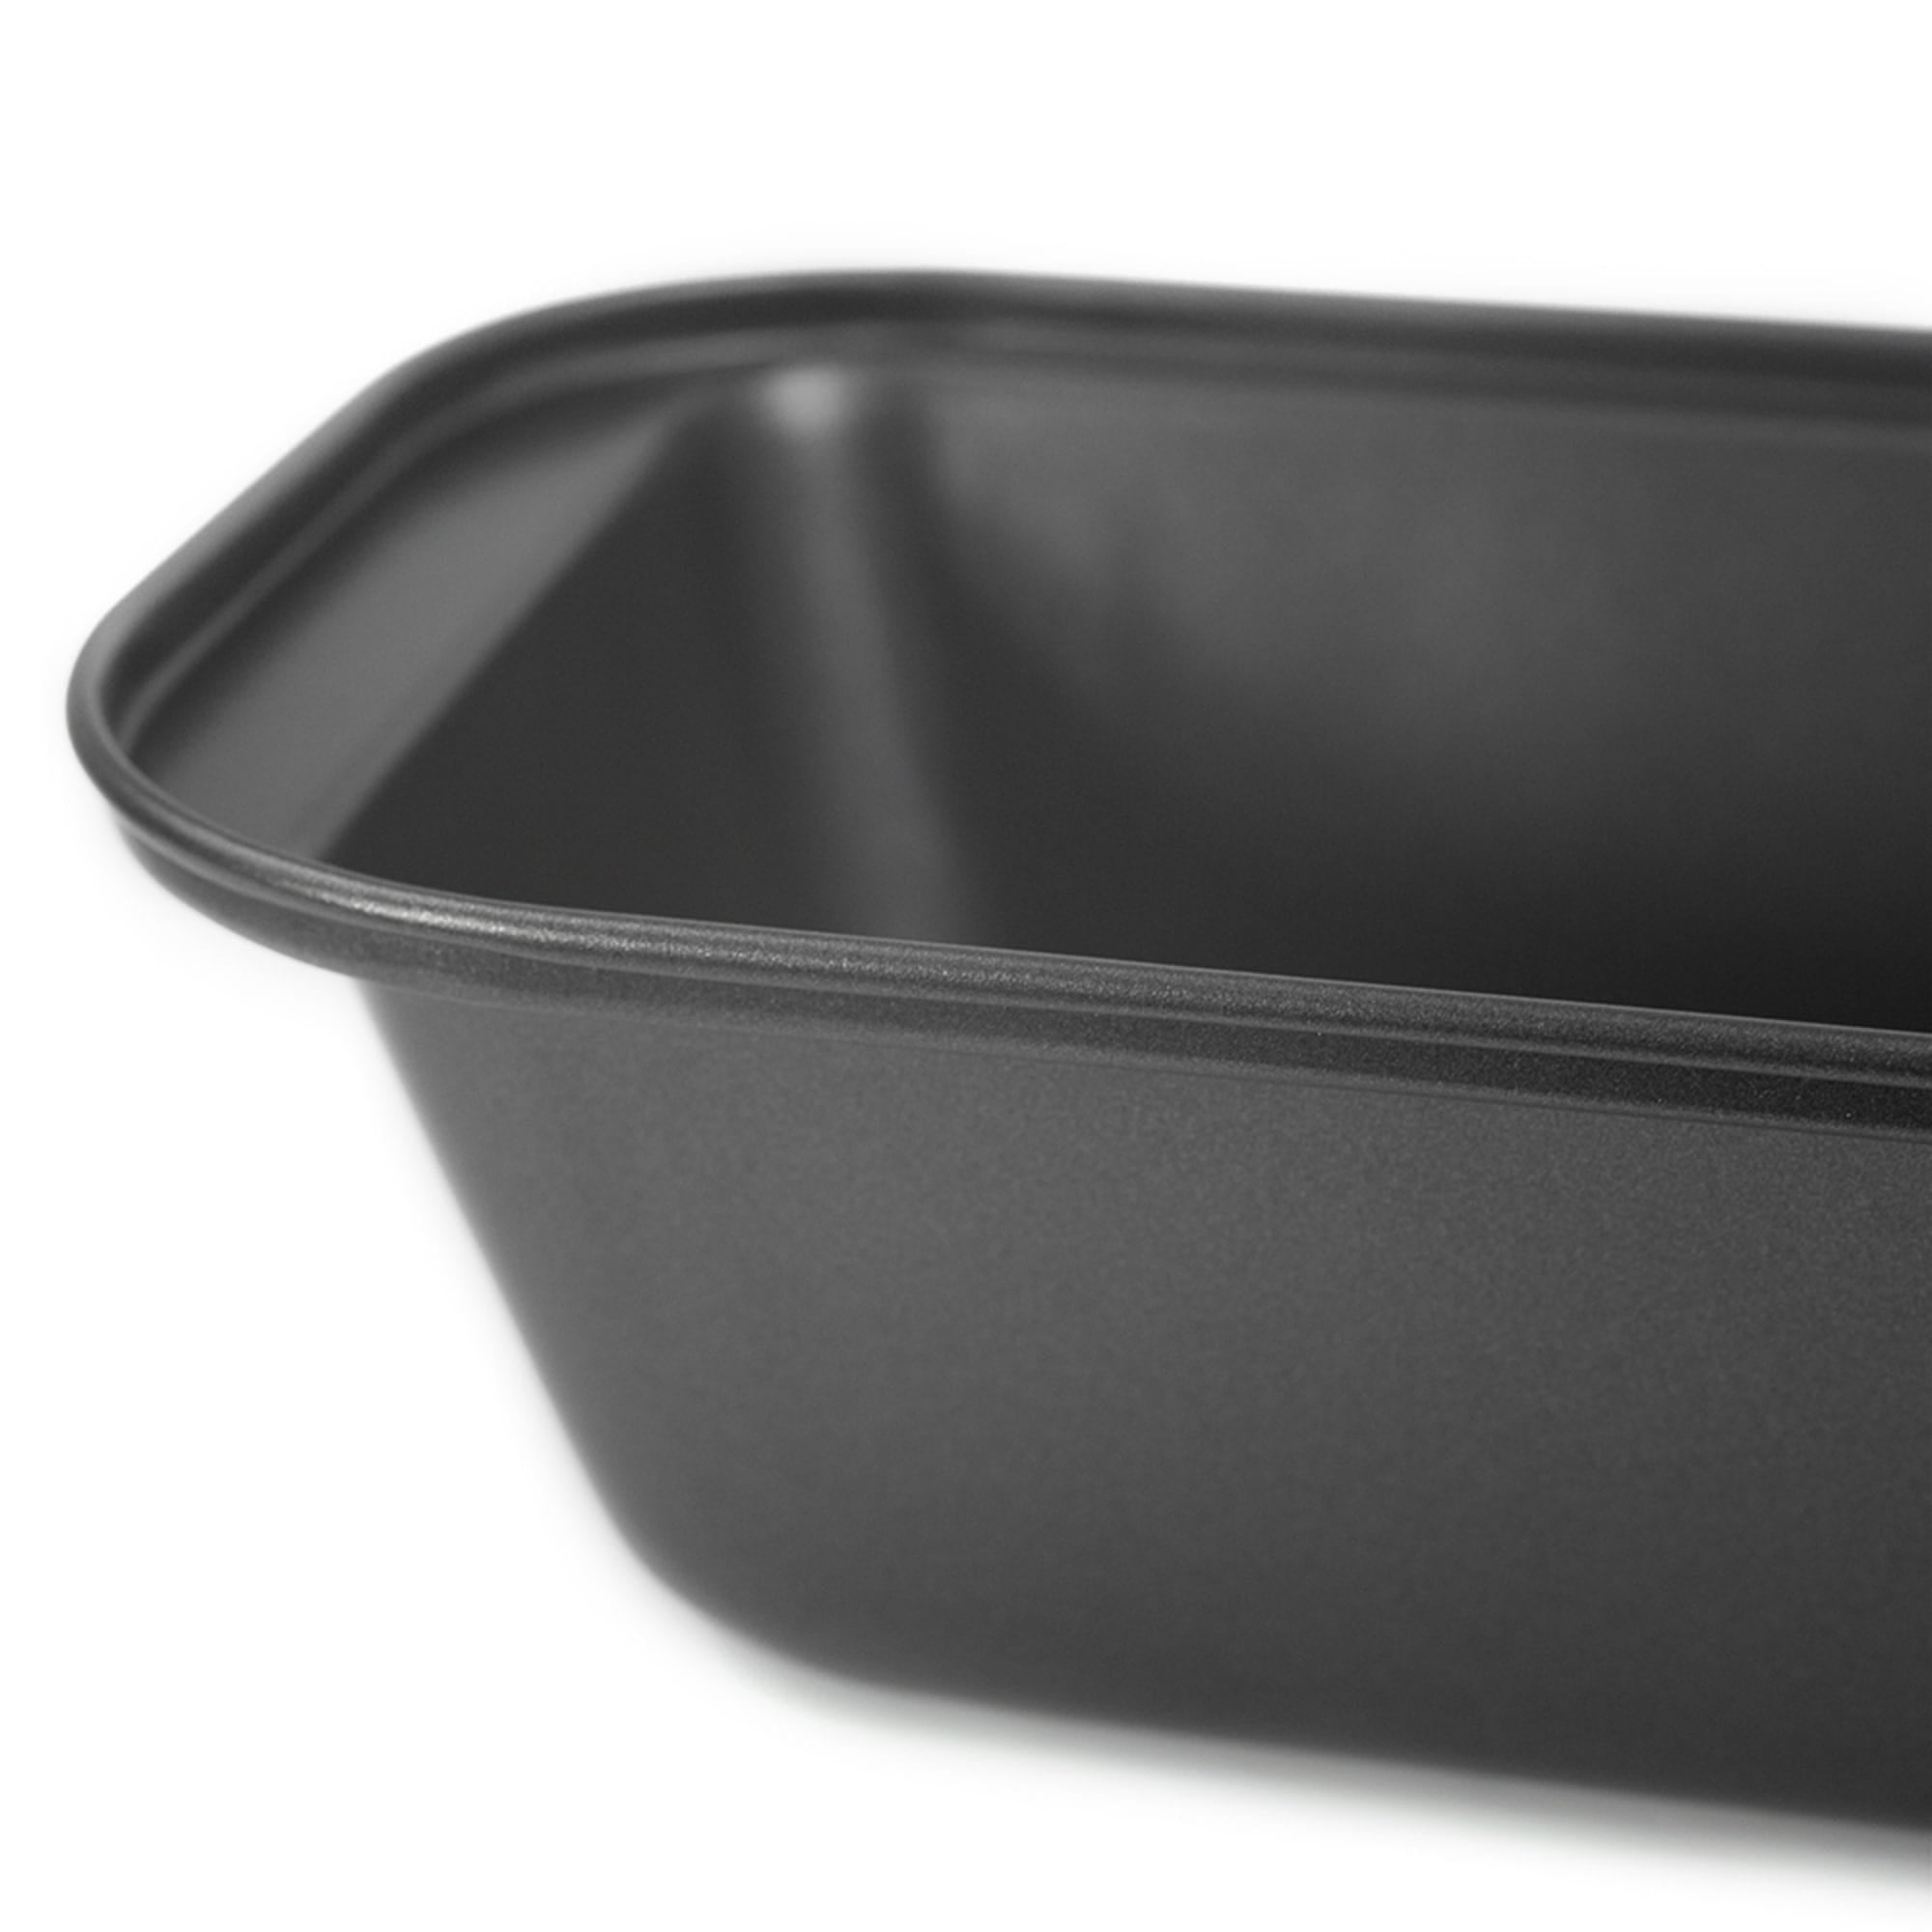 Home Basics Non-Stick Loaf Pan $3.00 EACH, CASE PACK OF 24